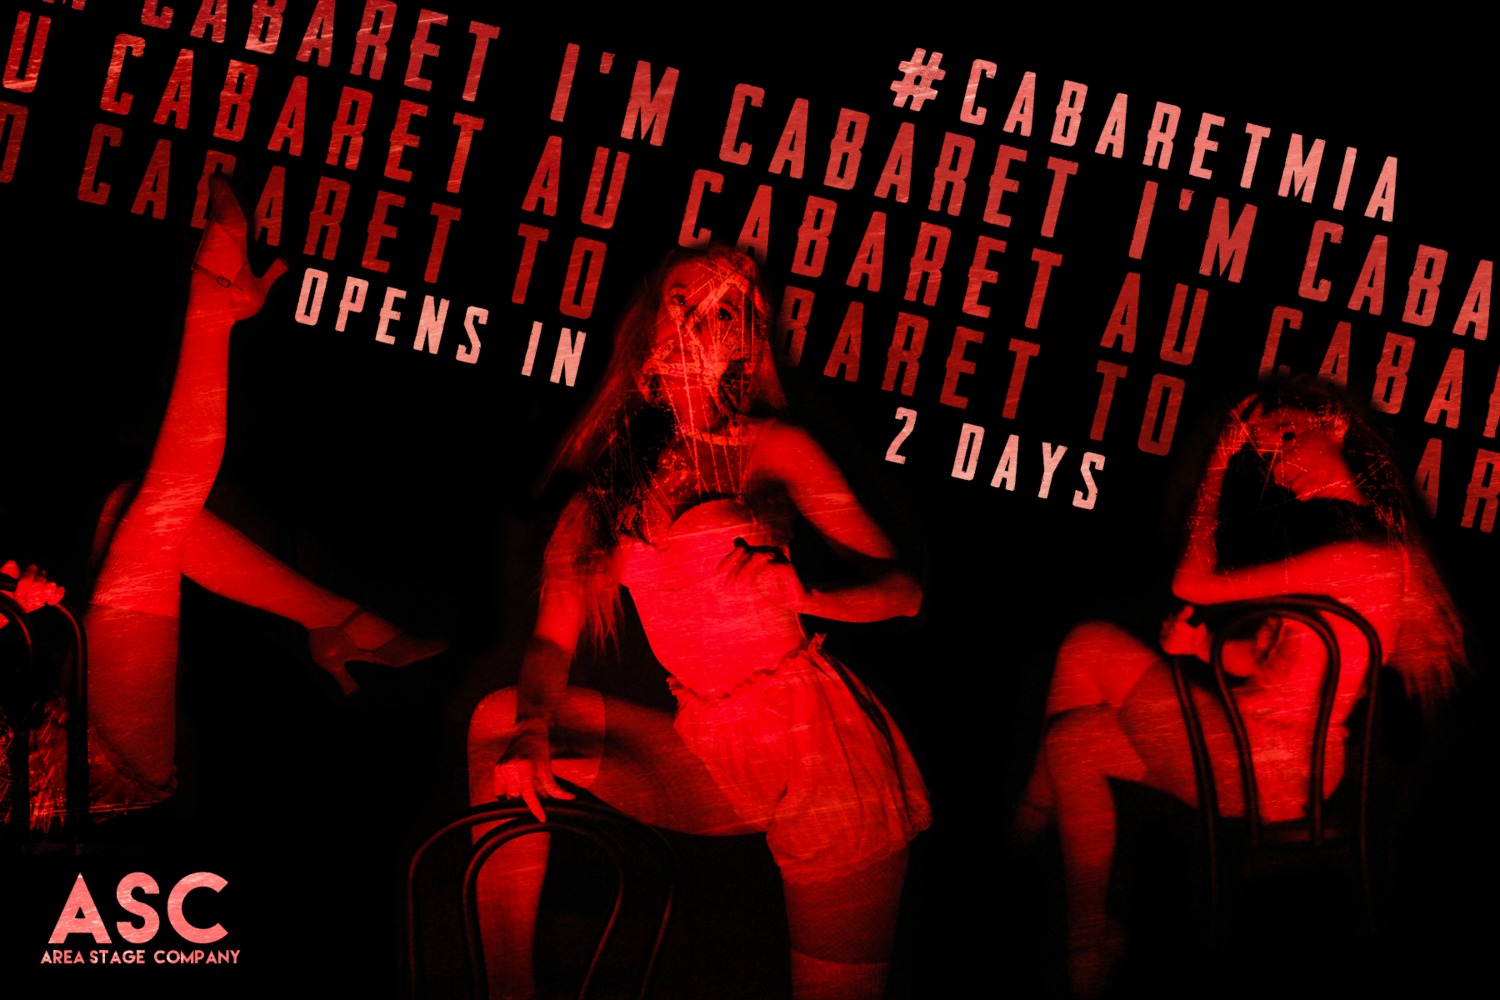 Just two more days until life is a Cabaret!